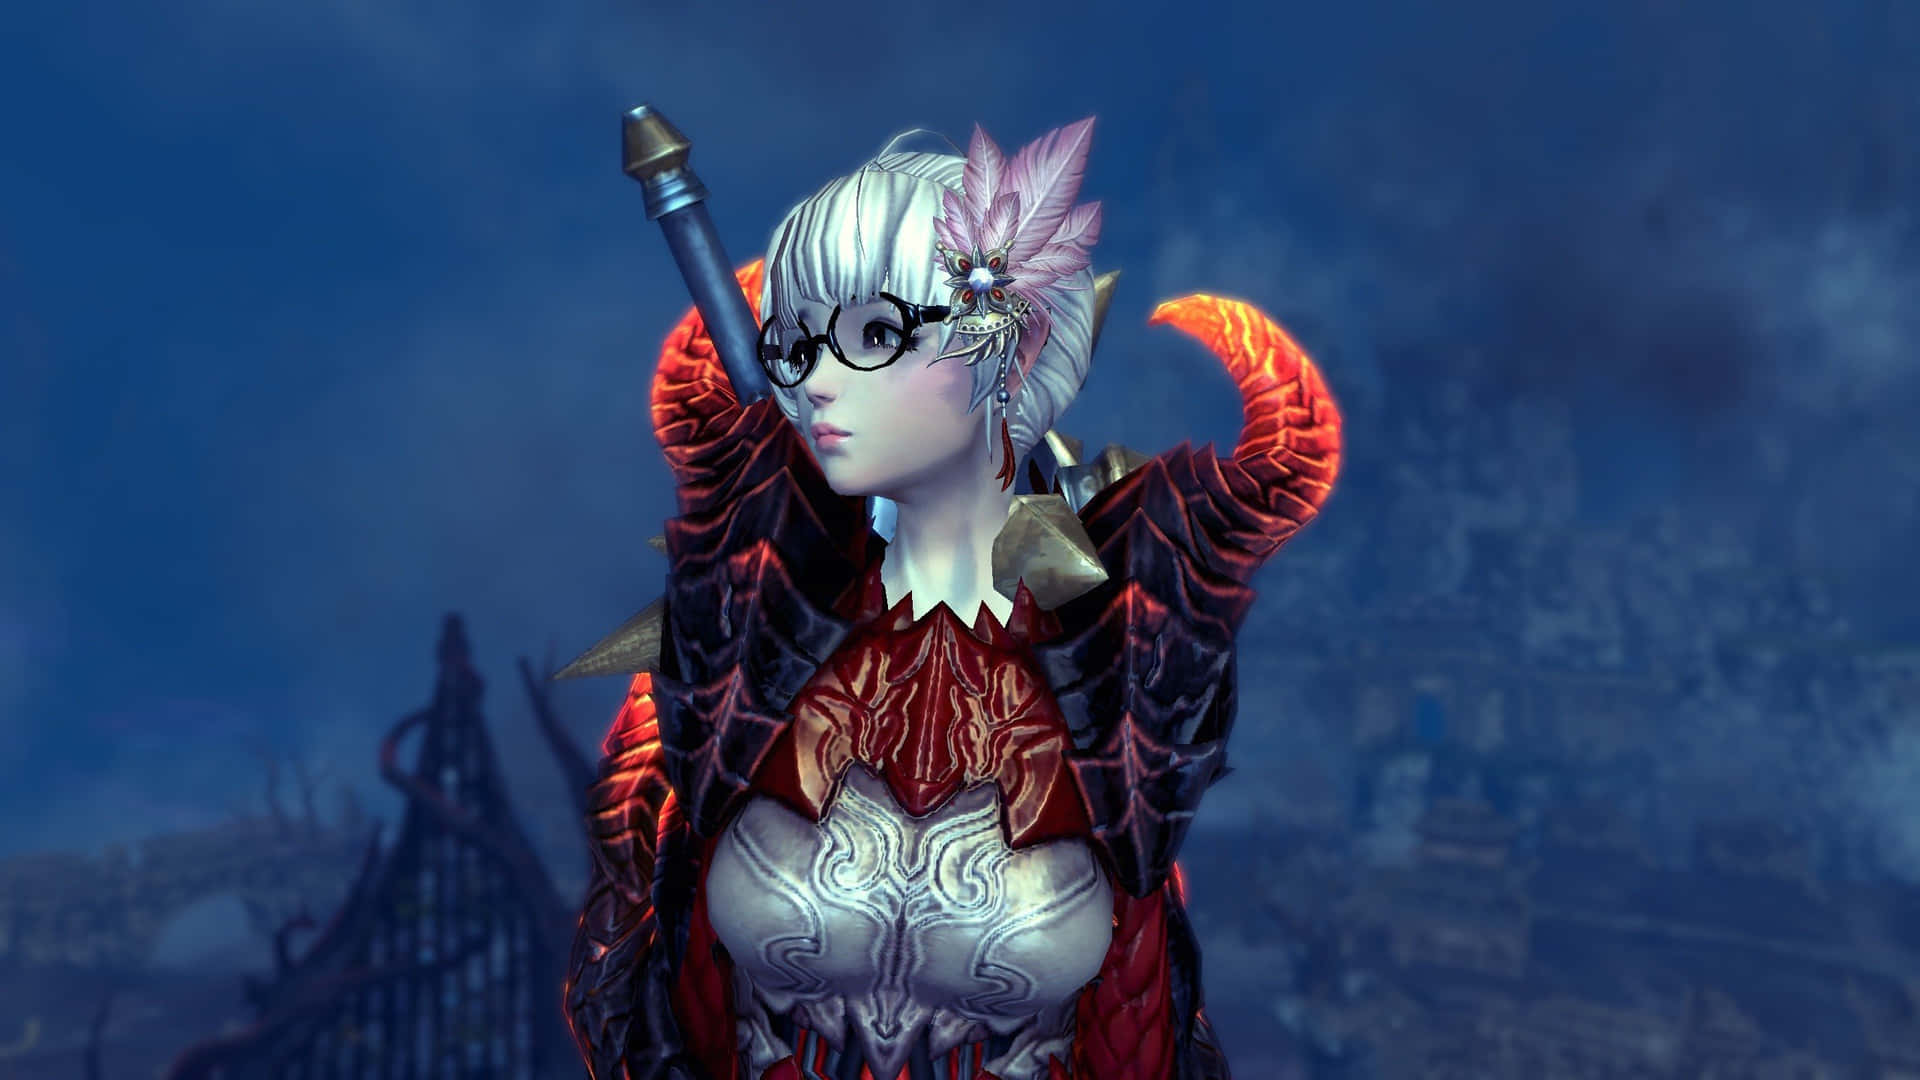 Take up your swords and fight for glory in Blade and Soul Wallpaper